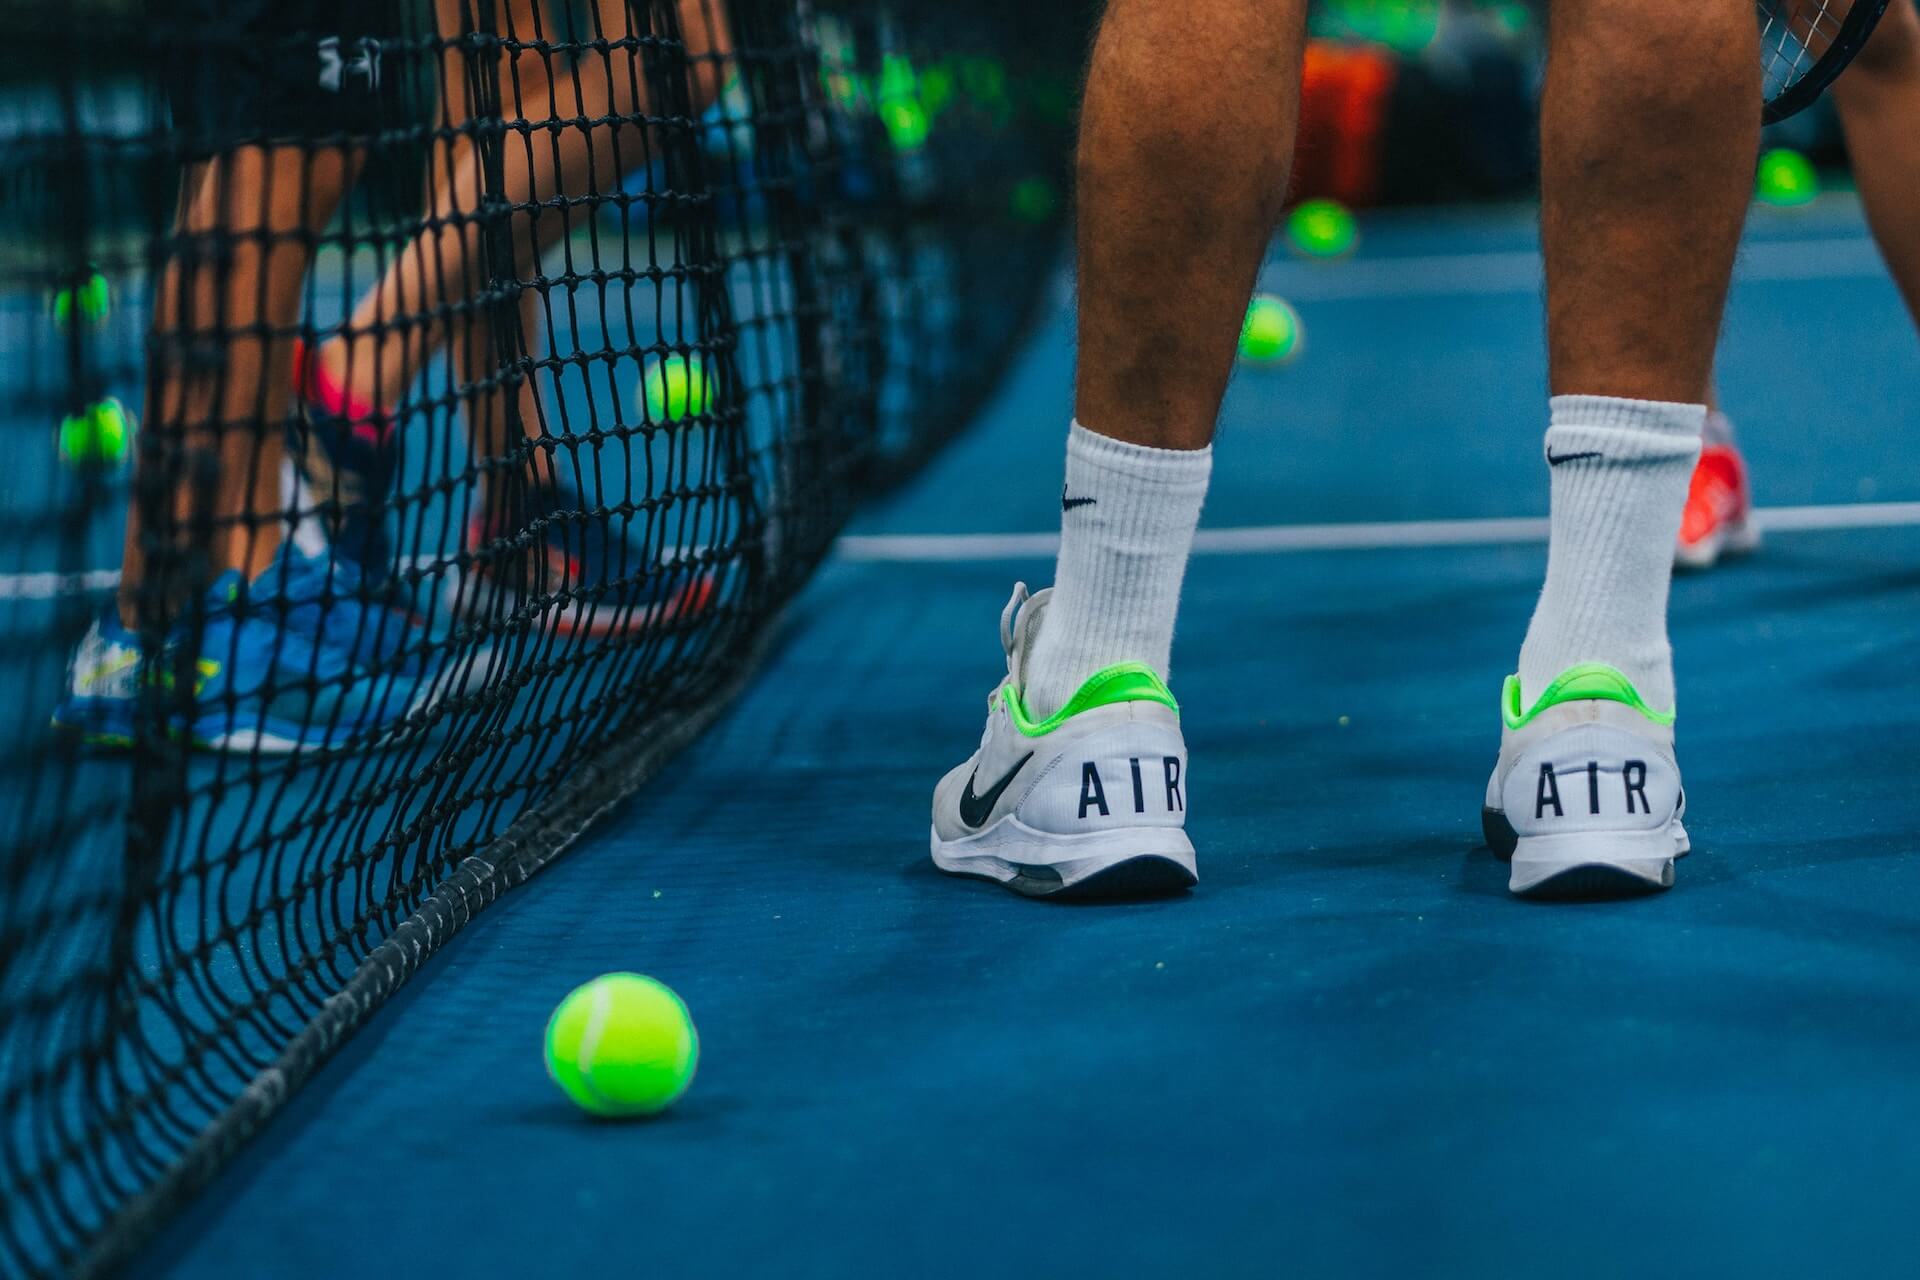 person in tennis shoes and socks standing on tennis court